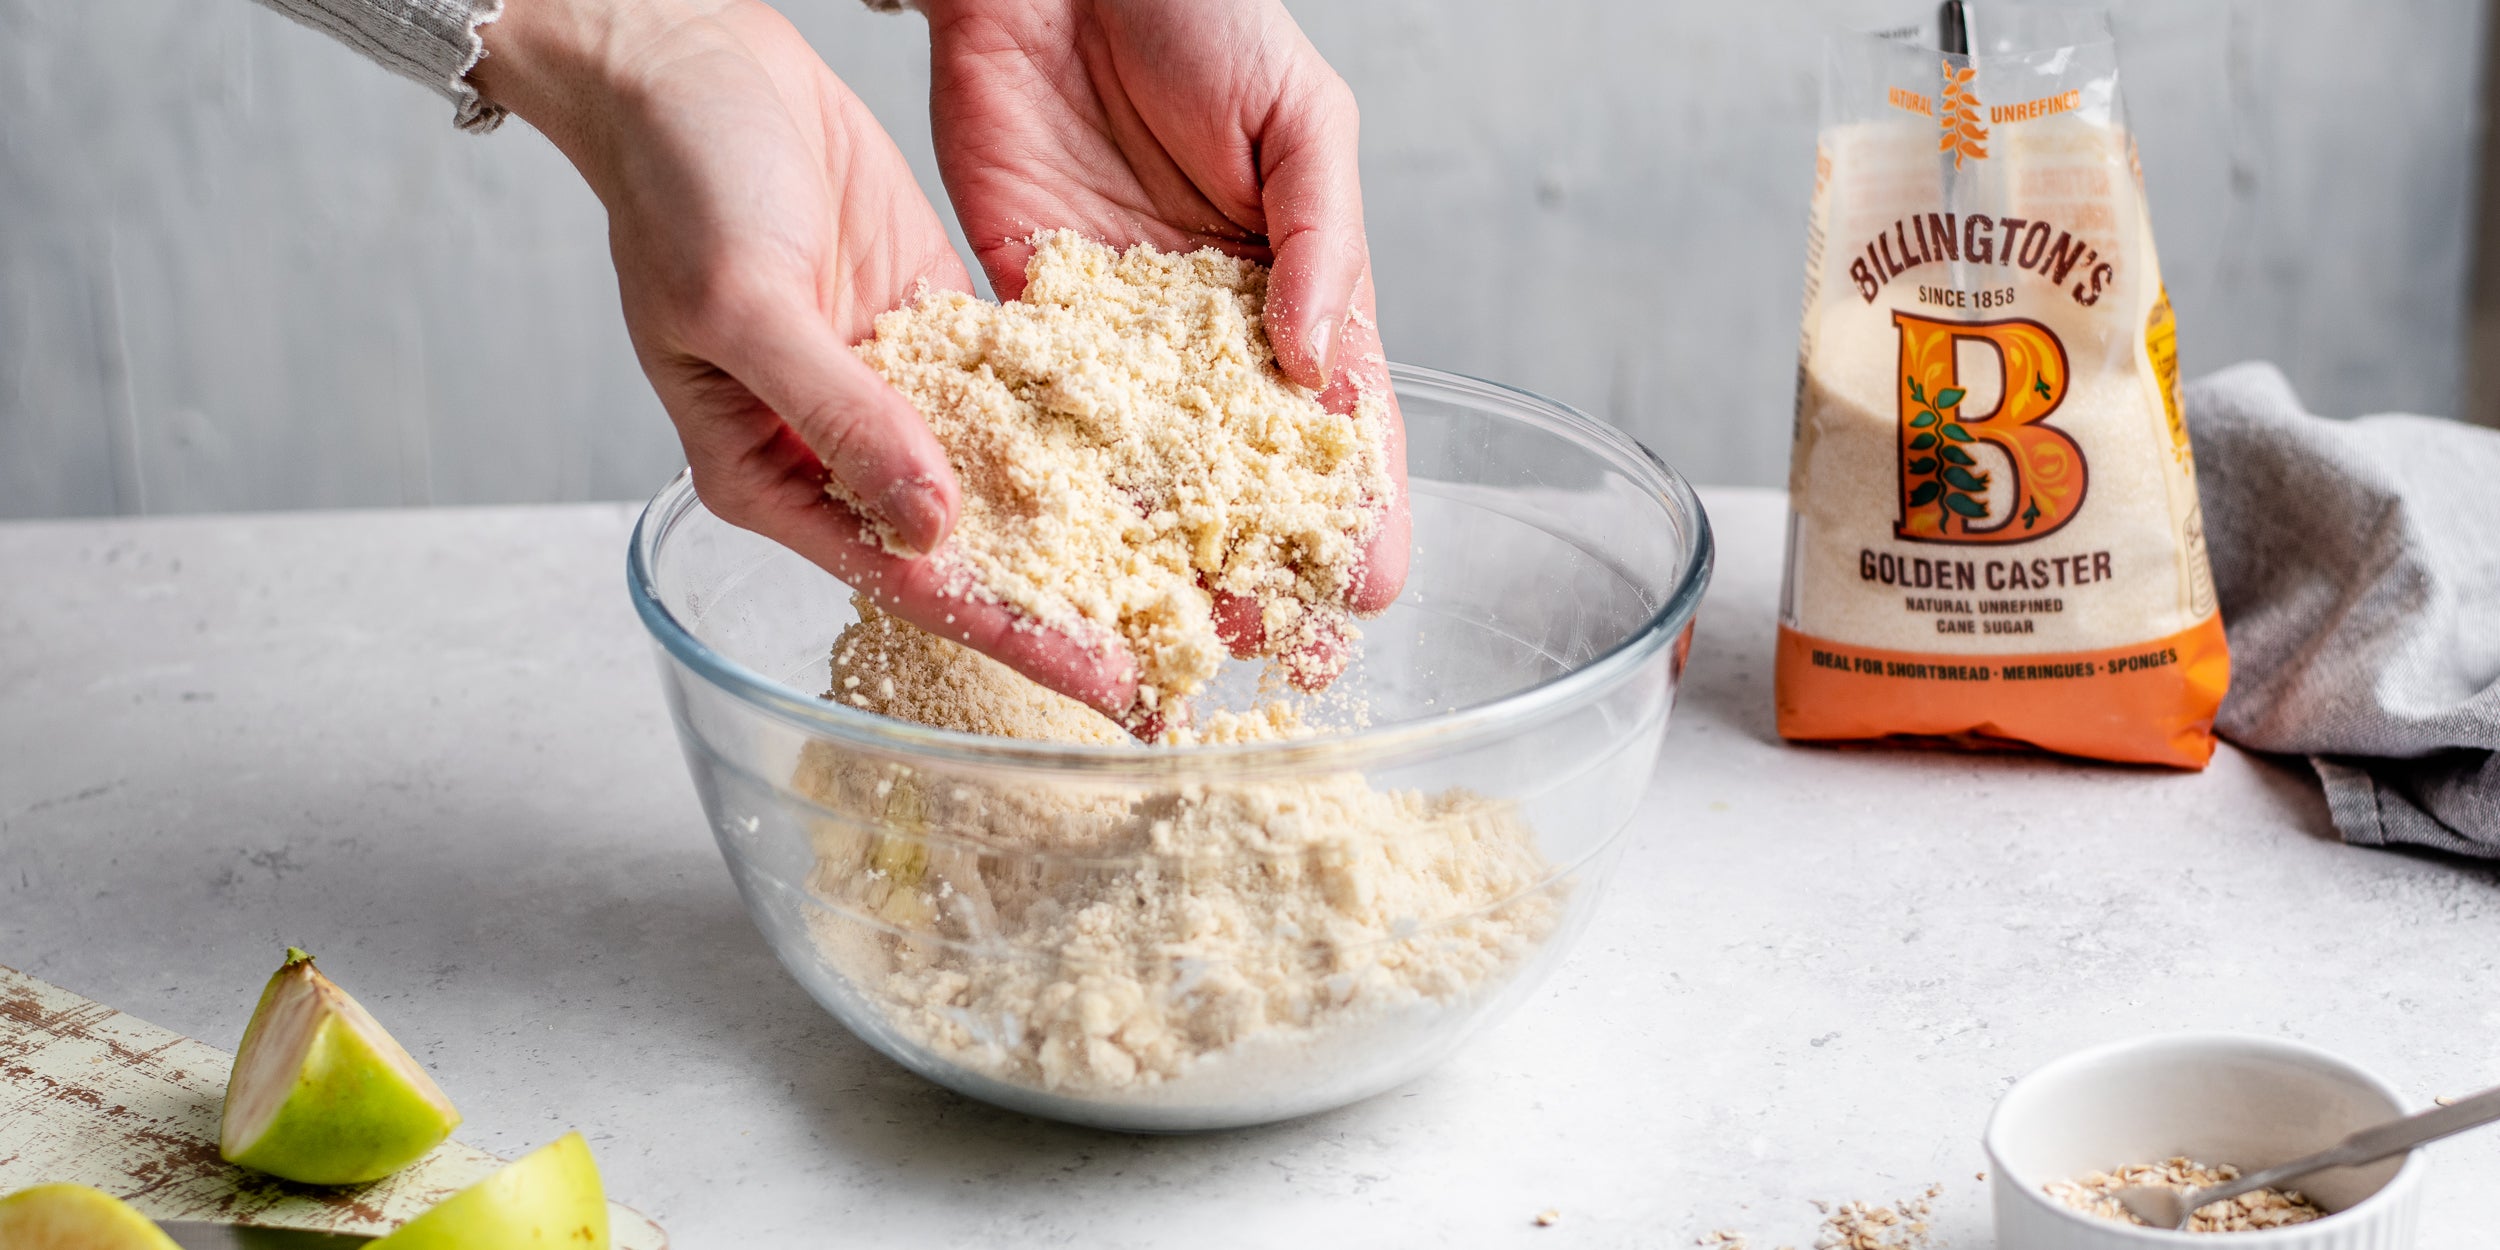 Hands combining the crumble mixture together with Billington's Golden Caster Sugar ready to bake in the oven